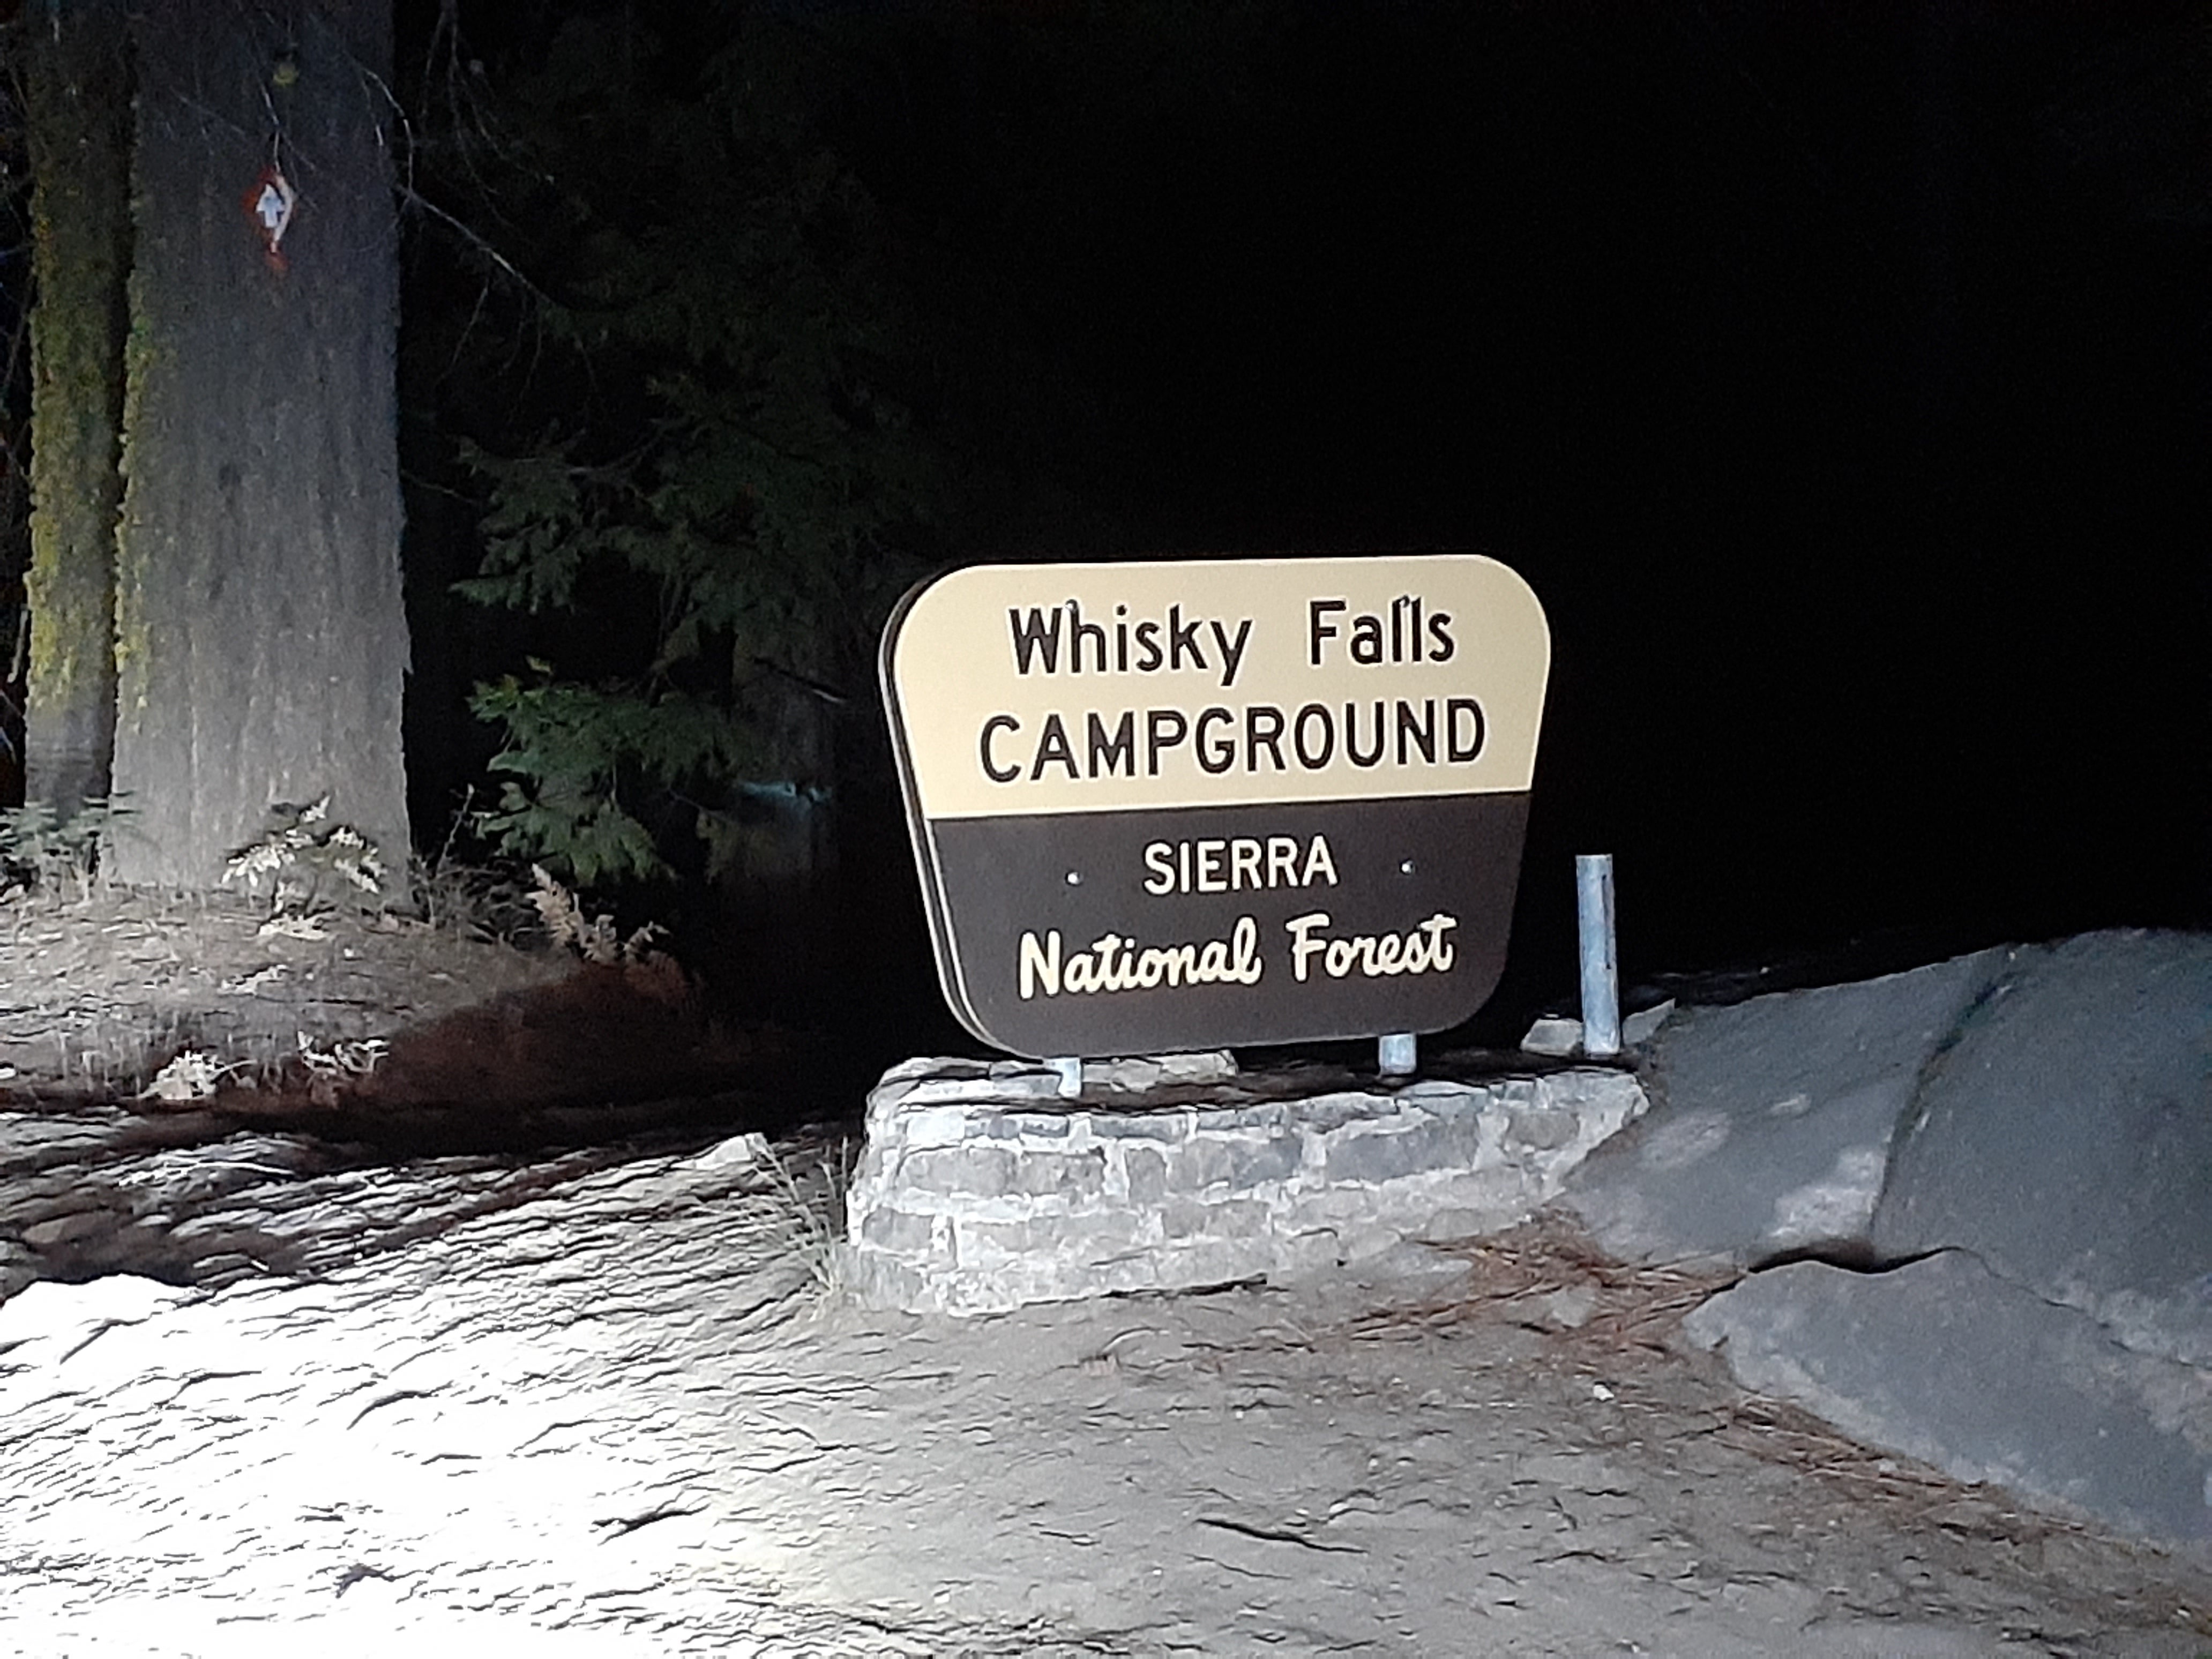 Camper submitted image from Whisky Falls Campground - 1